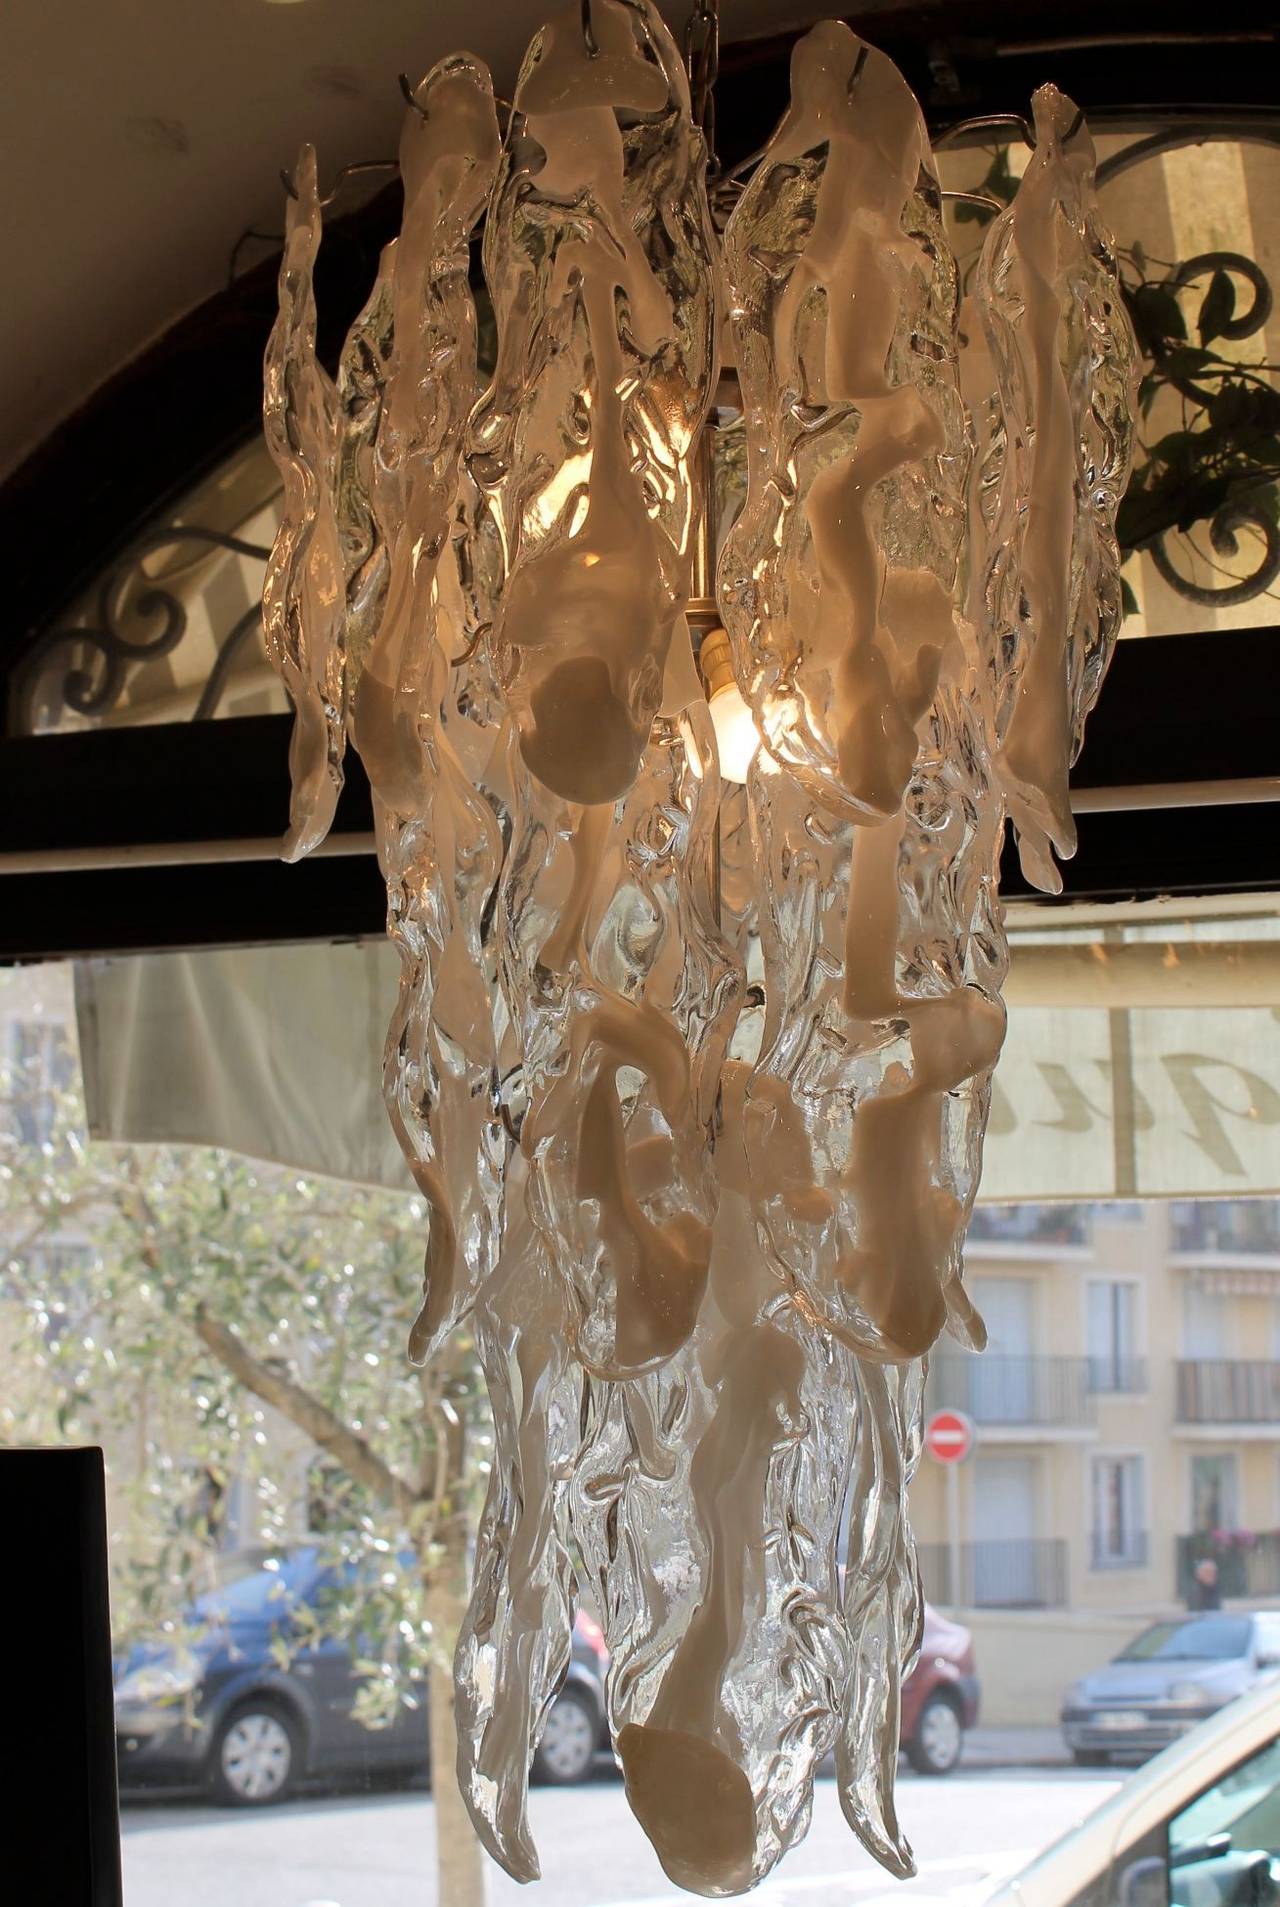 Very nice chandelier by Murano Mazzega, with glass leaves. High quality glass lamp with nice light effect.